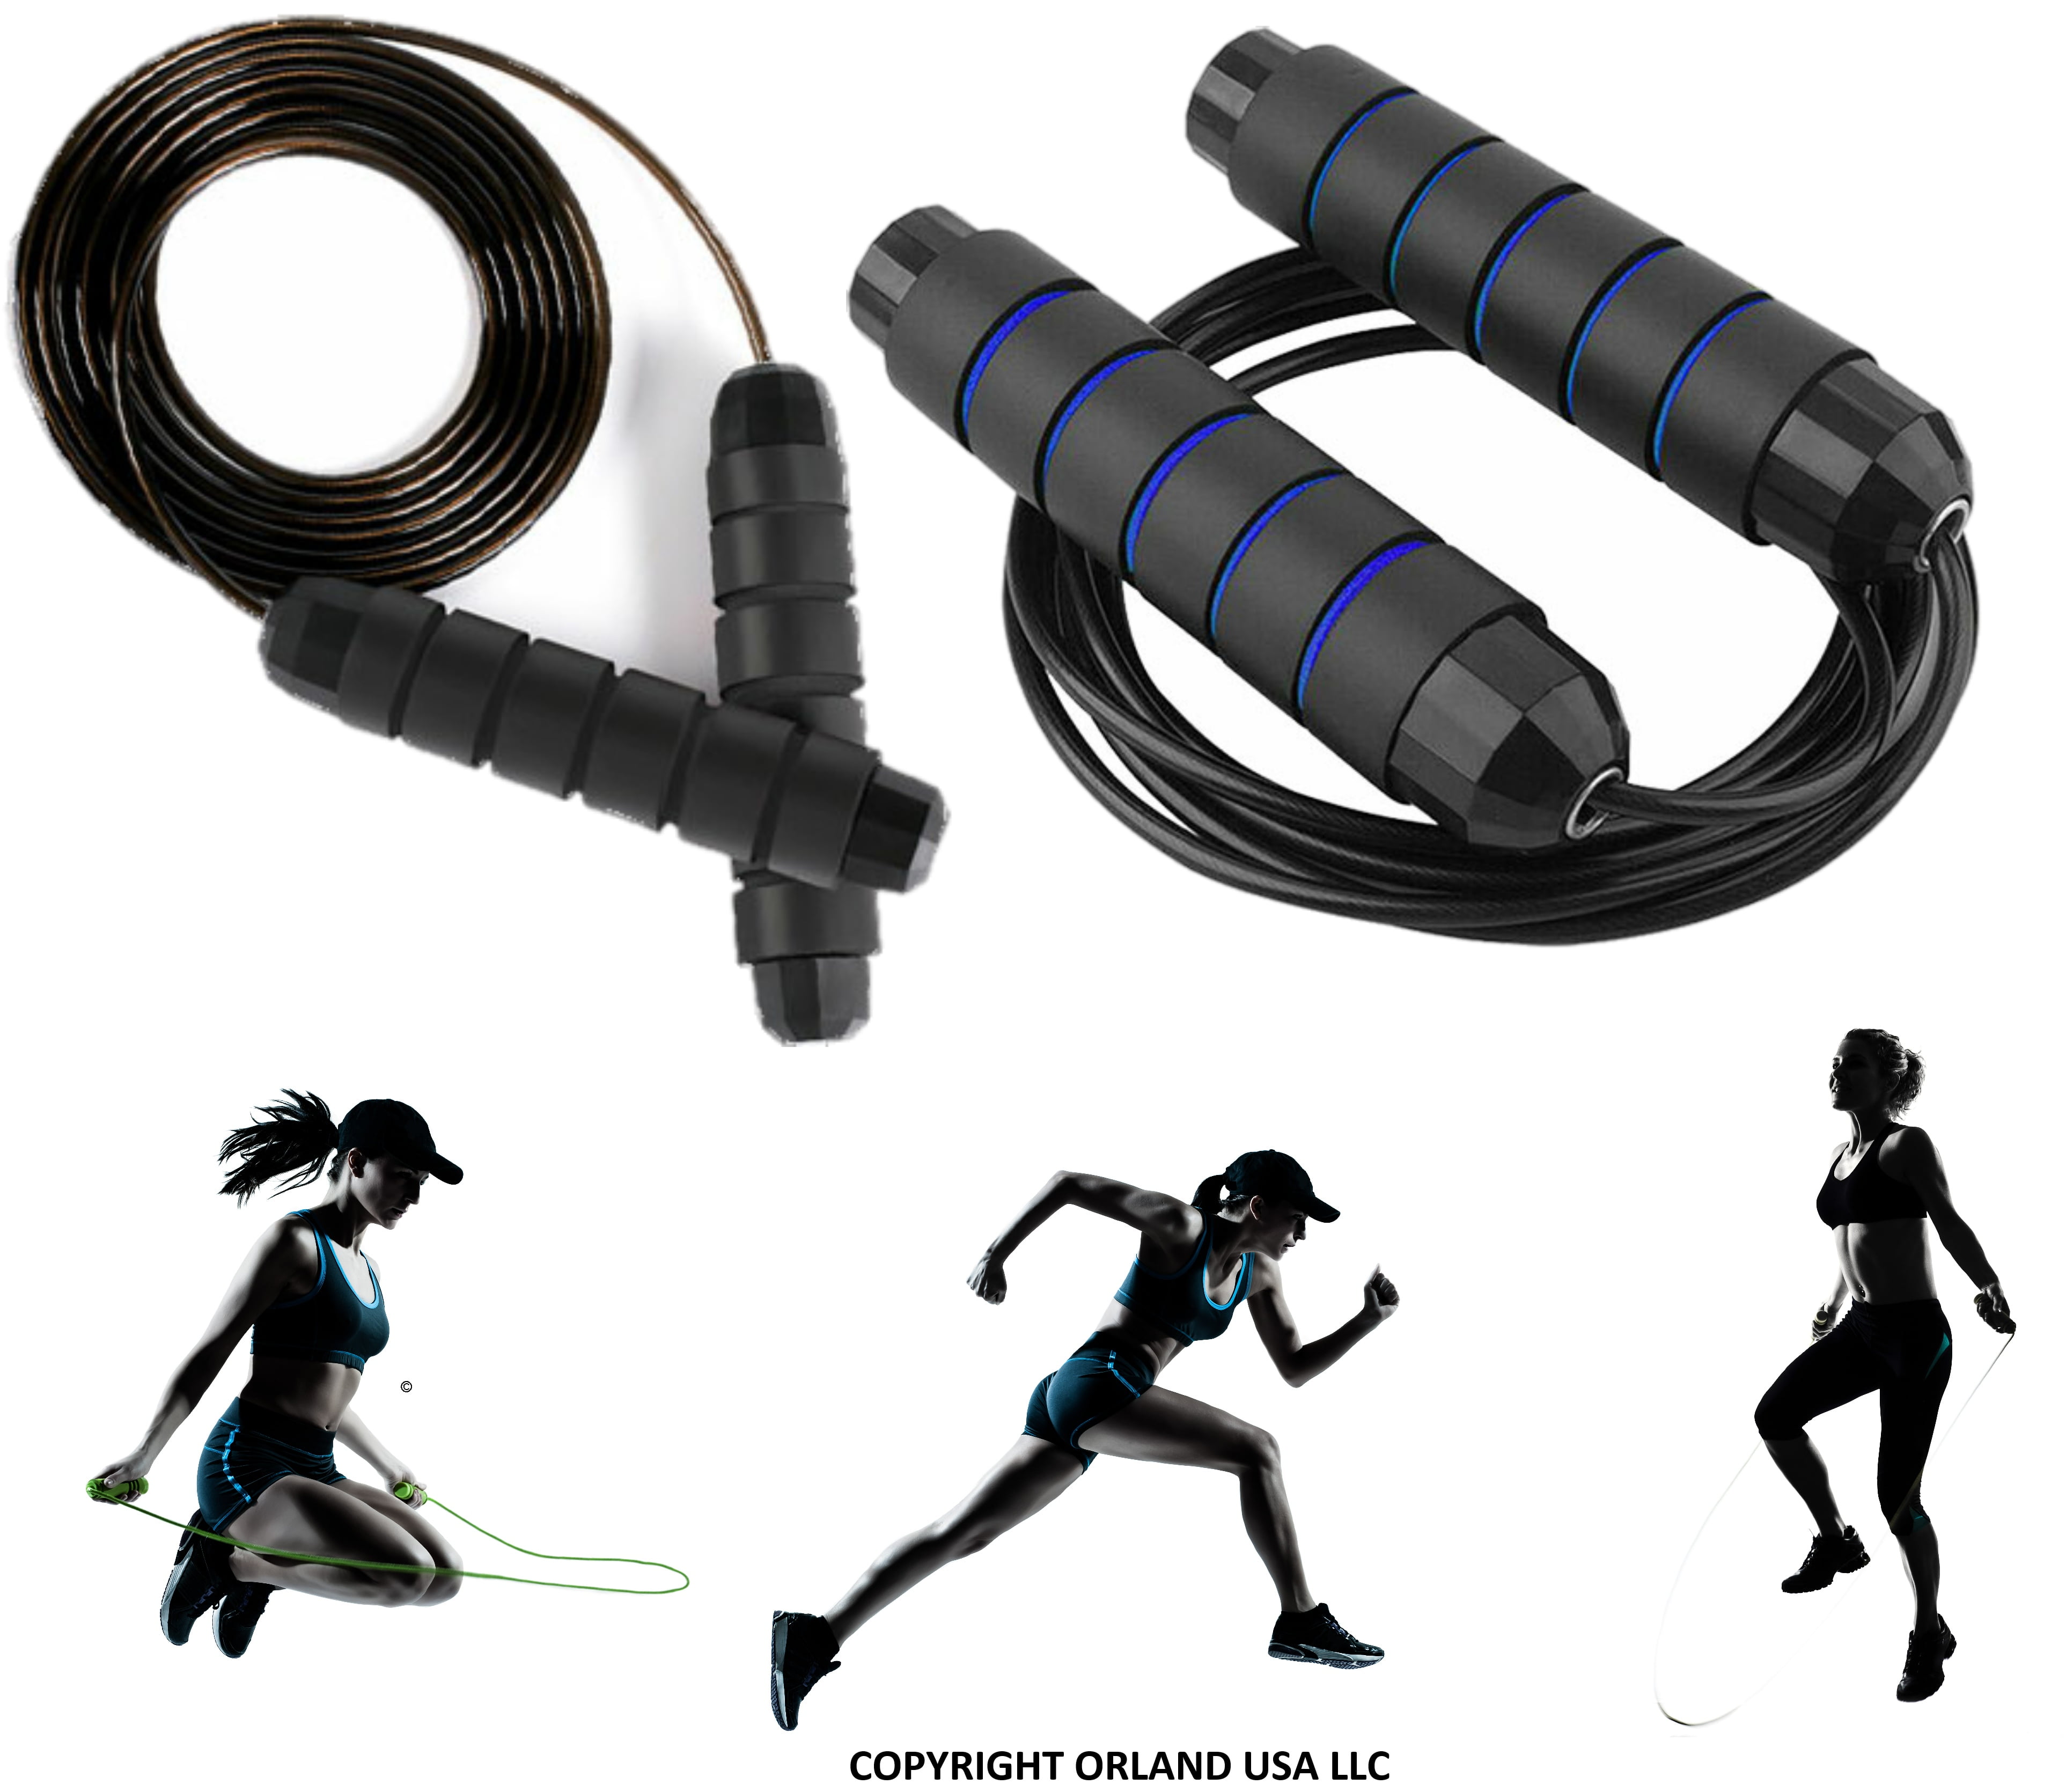 Mornex 2Pack-Skipping Rope,Tangle-Free with Ball Bearing Cable Speed Jump Rope and Memory Foam Handles,Men,Women and Kids,Suitable for Aerobic Exercise,Exercise Fitness